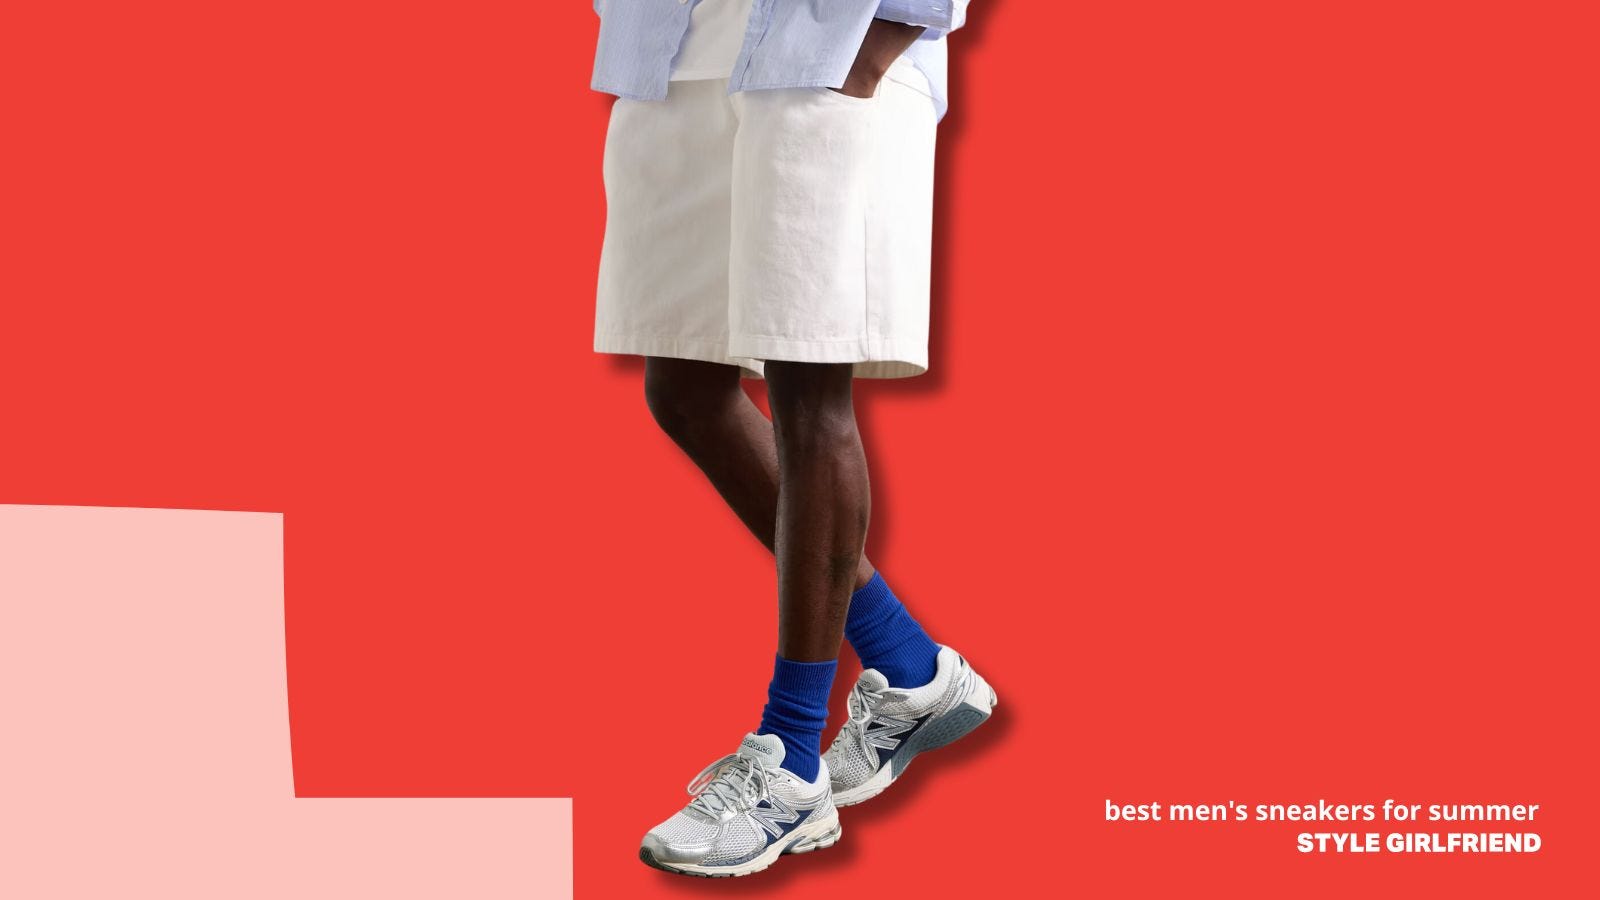 lower half of a man in a light blue shirt and off-white shorts, with New Balance sneakers and blue socks